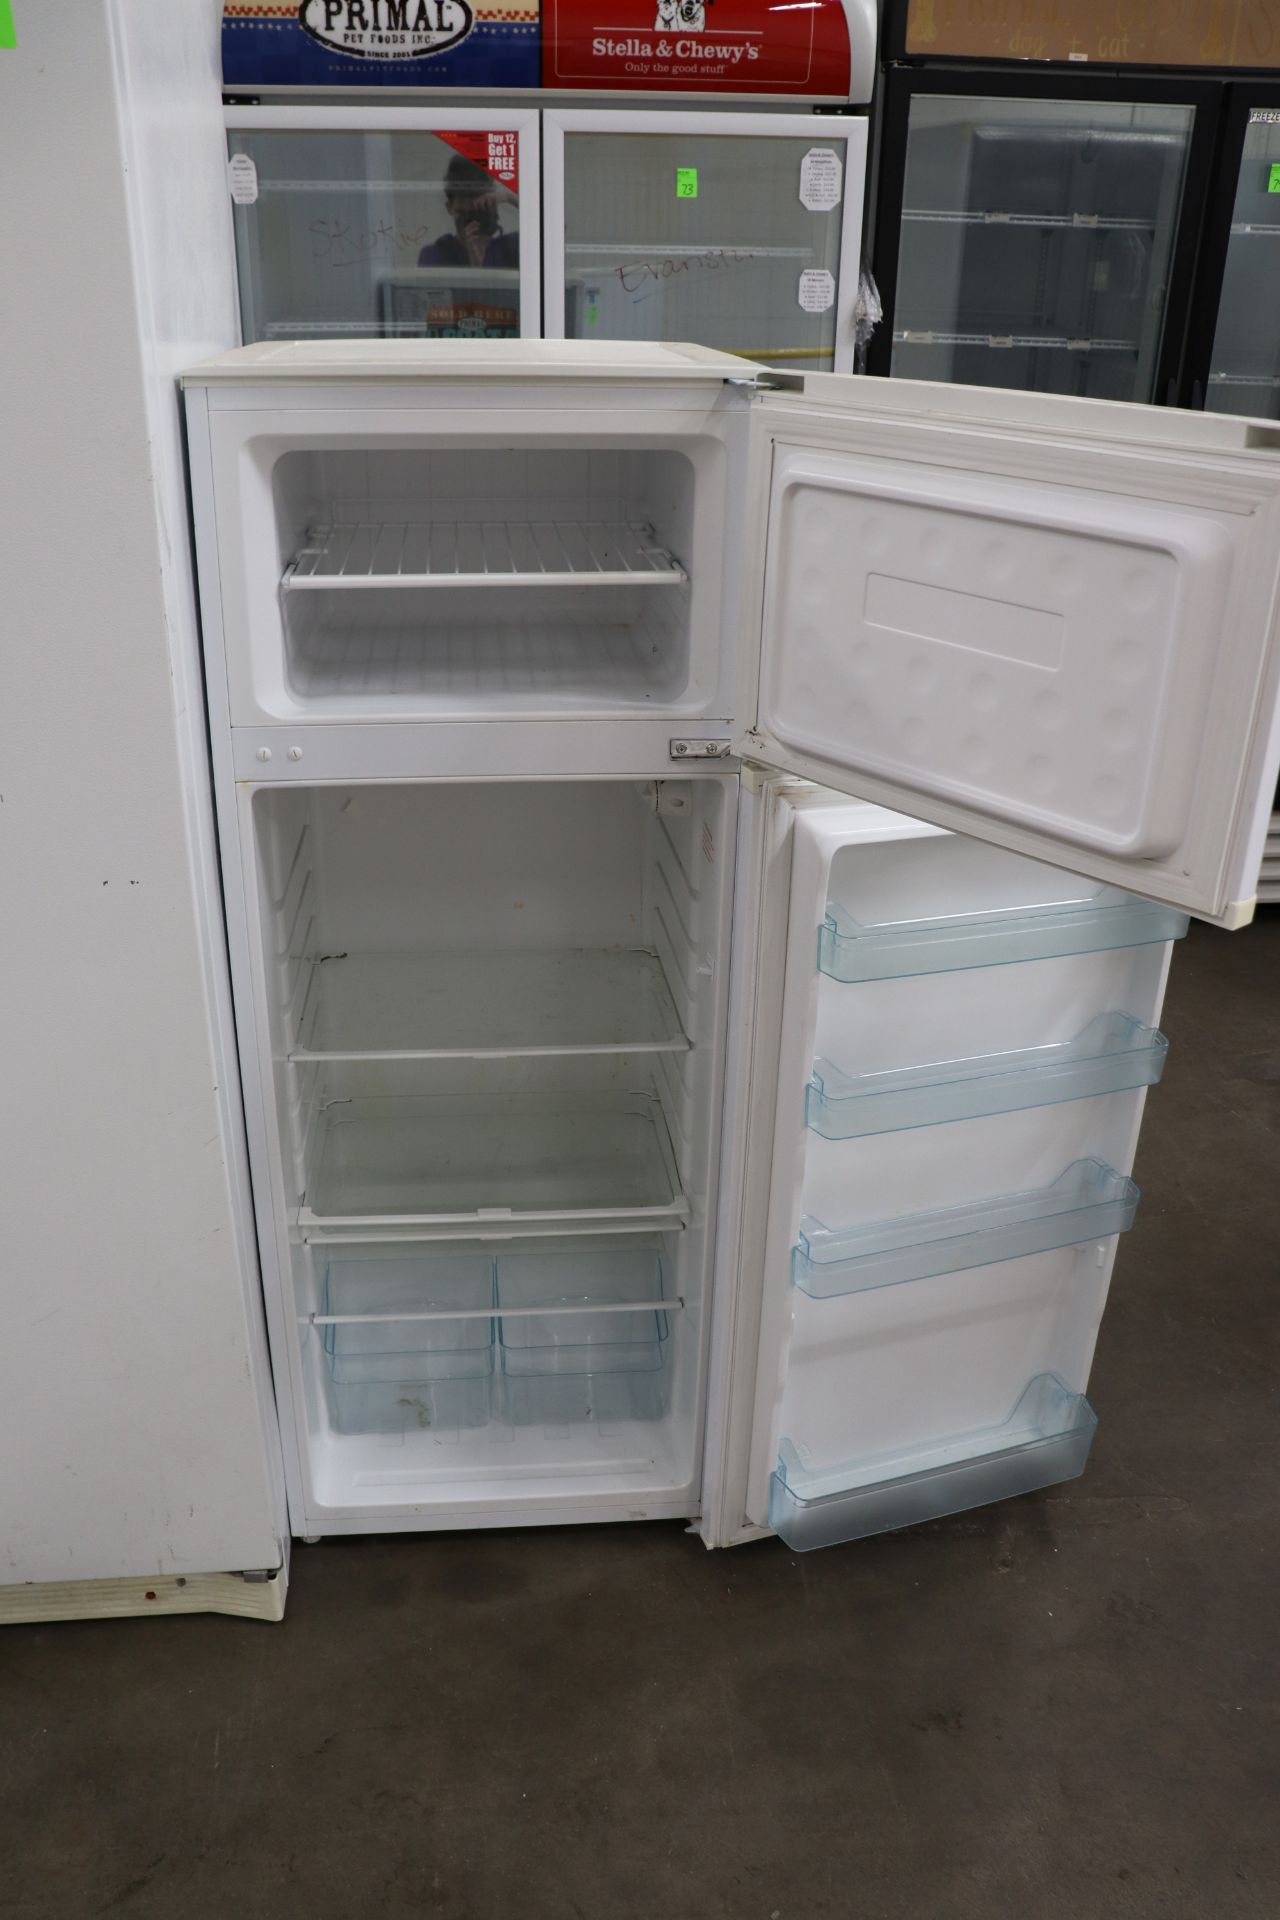 Criterion Combination Freezer/Refrigerator, Model CTMR73A1W, Serial A57779707351581000027 - Image 7 of 7